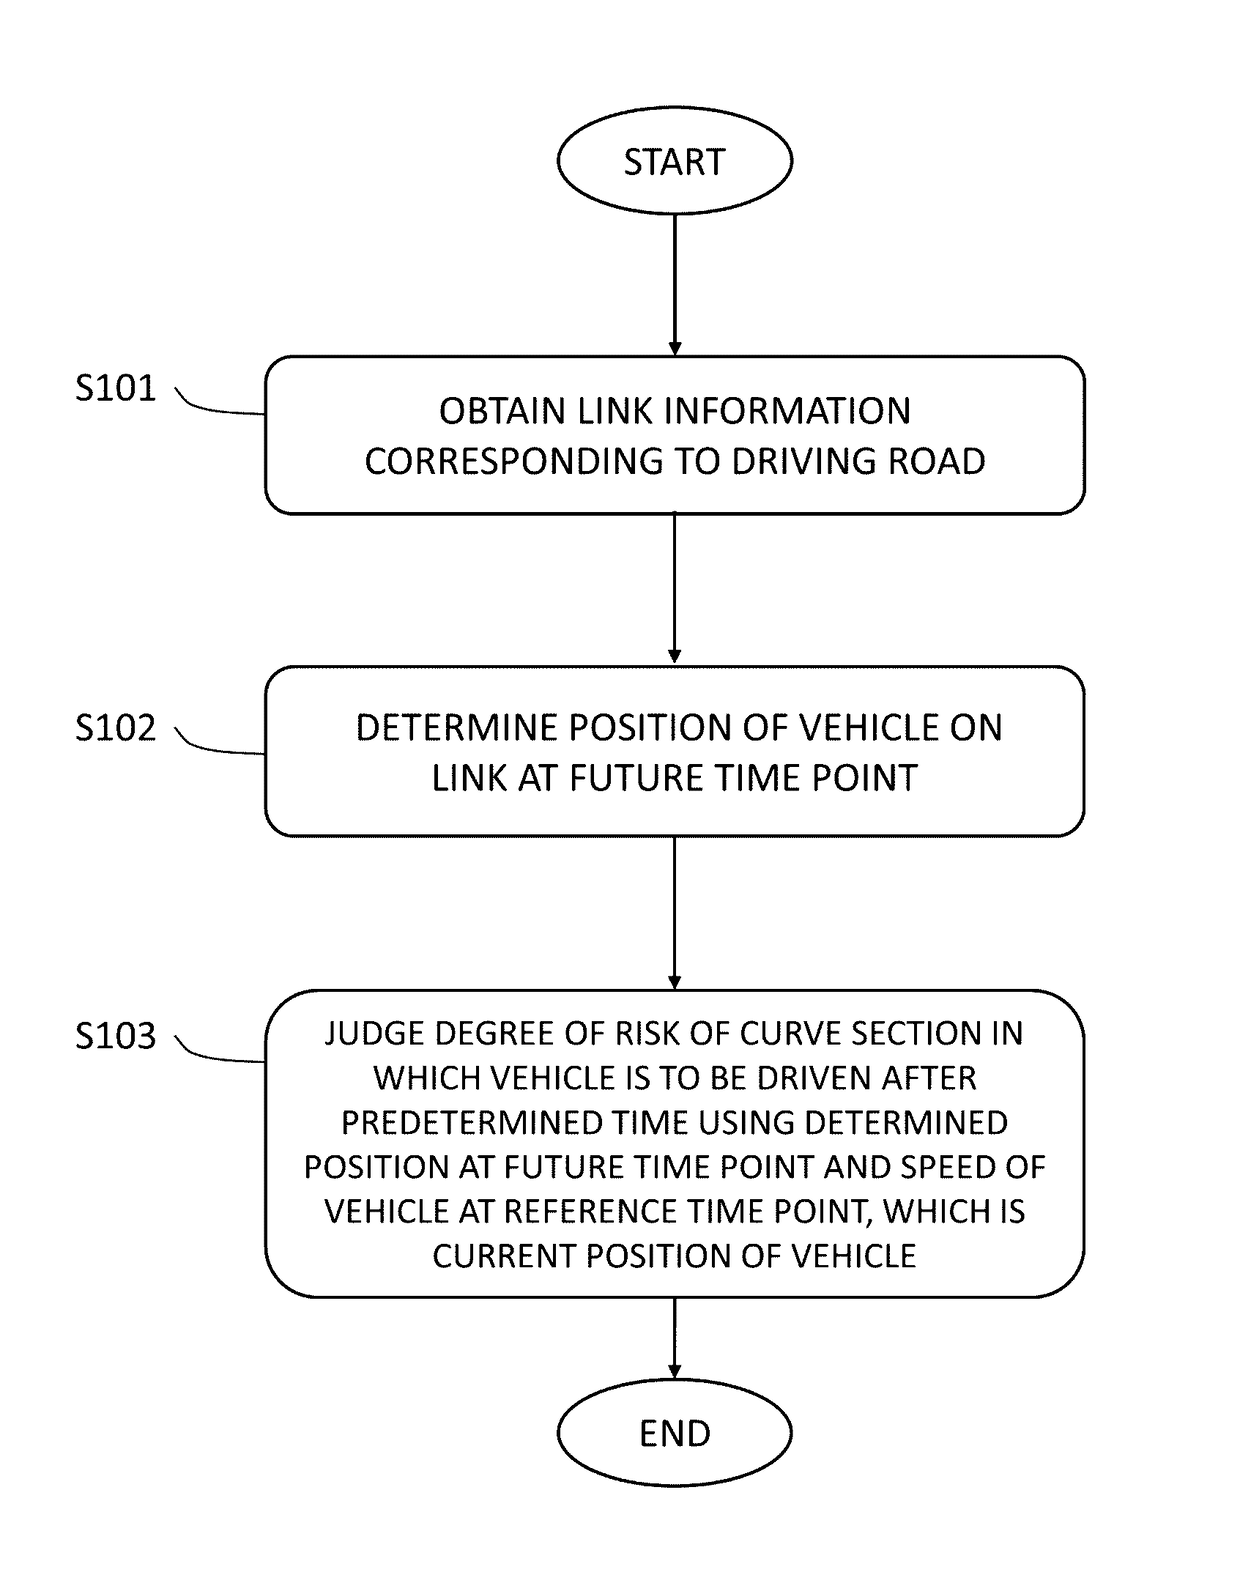 Curve guidance method, curve guidance apparatus, electronic apparatus and program stored in the computer-readable recording medium